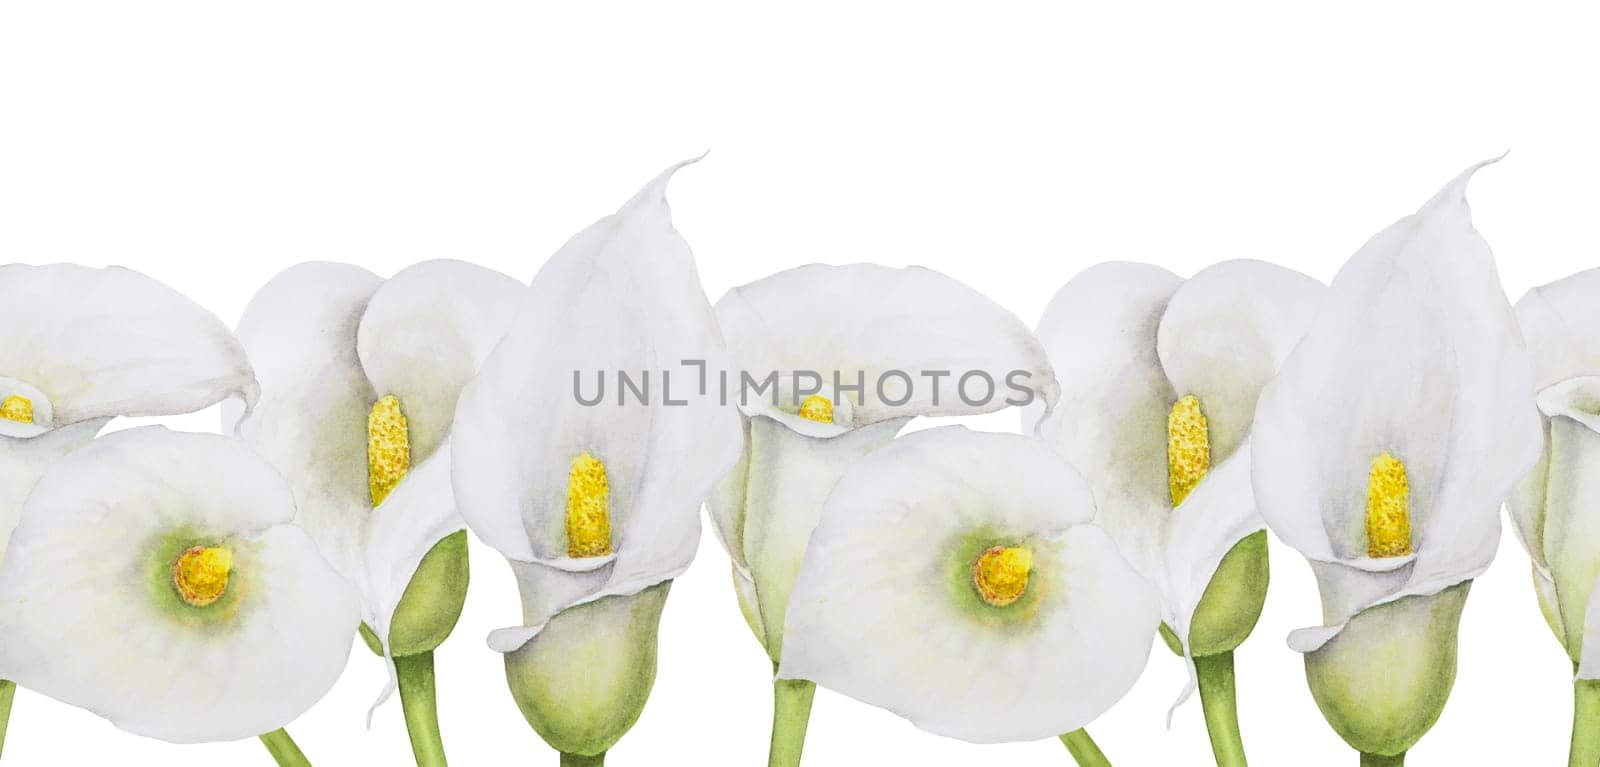 Watercolor clipart of white calla lily. Hand drawn floral illustration for wedding invitations, floristic salons, cosmetics, beauty. Isolated tropical water arum for greetings, prints, posters